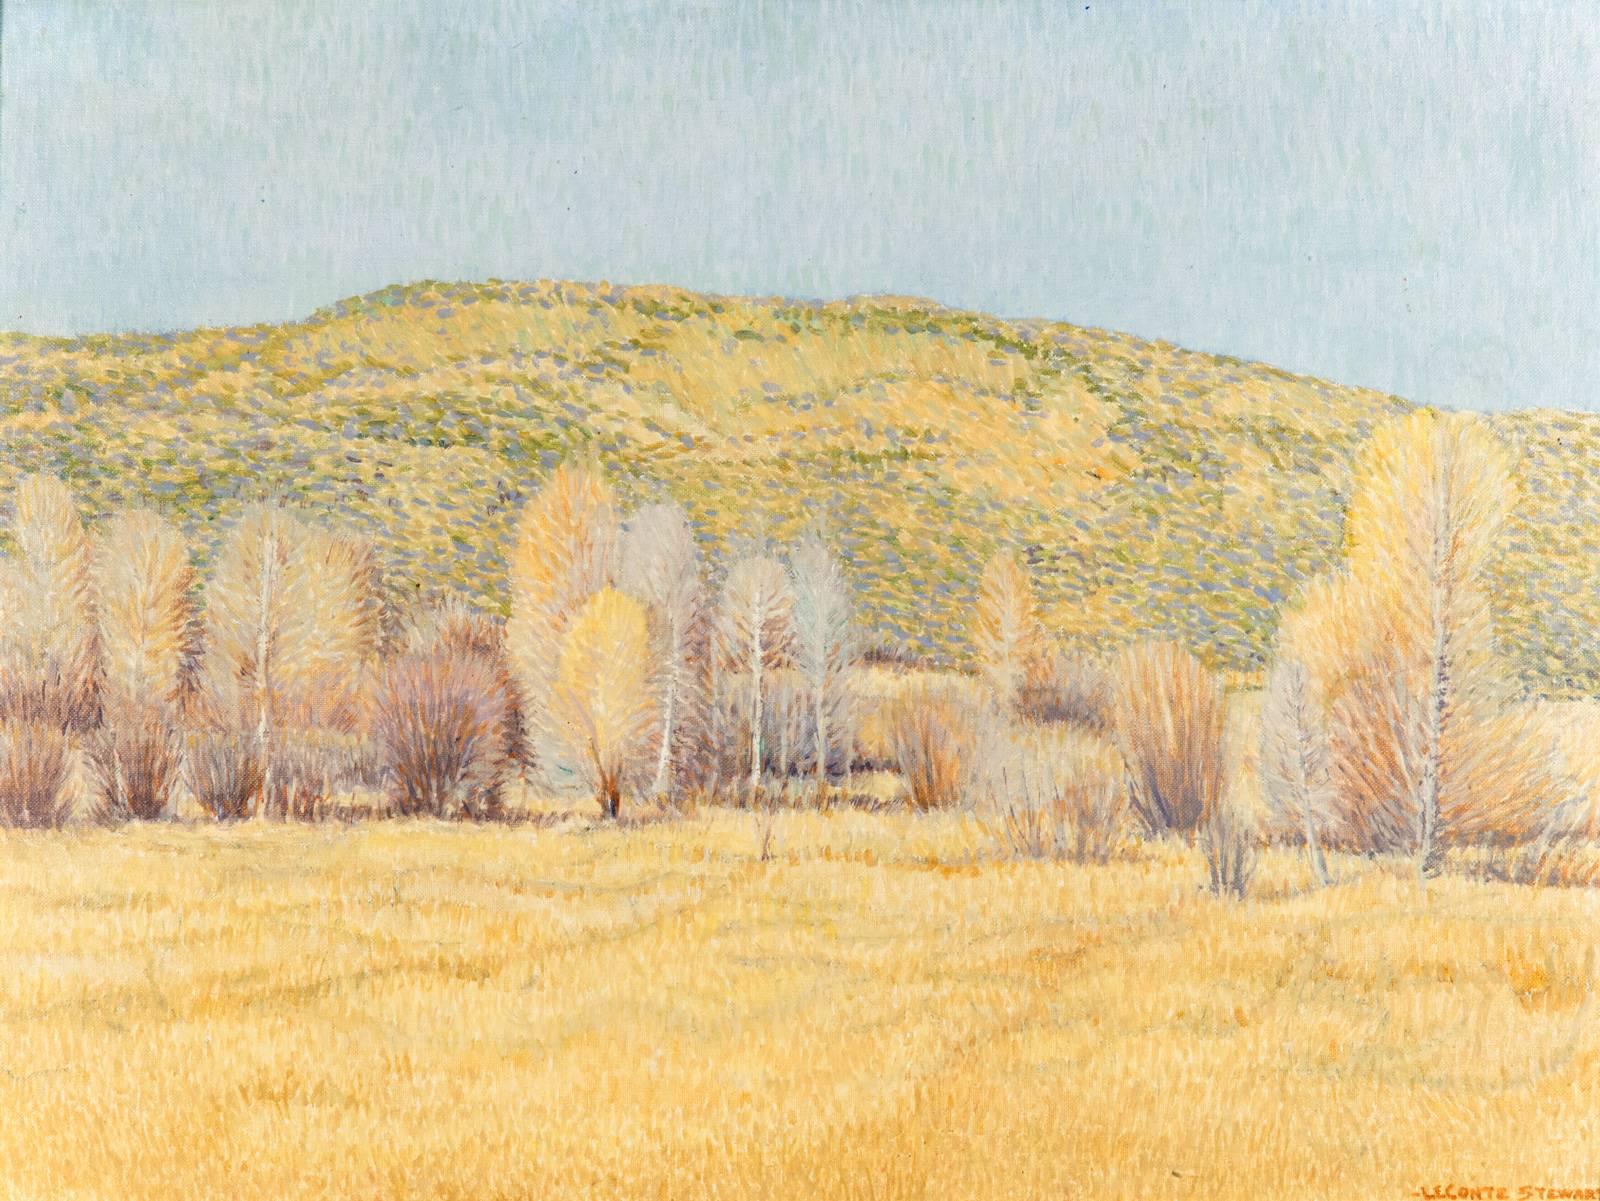 American artist LeConte Stewart (1891–1990) was primarily known for his unidealized landscapes of rural Utah. Stewart captured the land with its contemporary inflections, seeing raw beauty in the hard lands. There was an urgency in his work, the